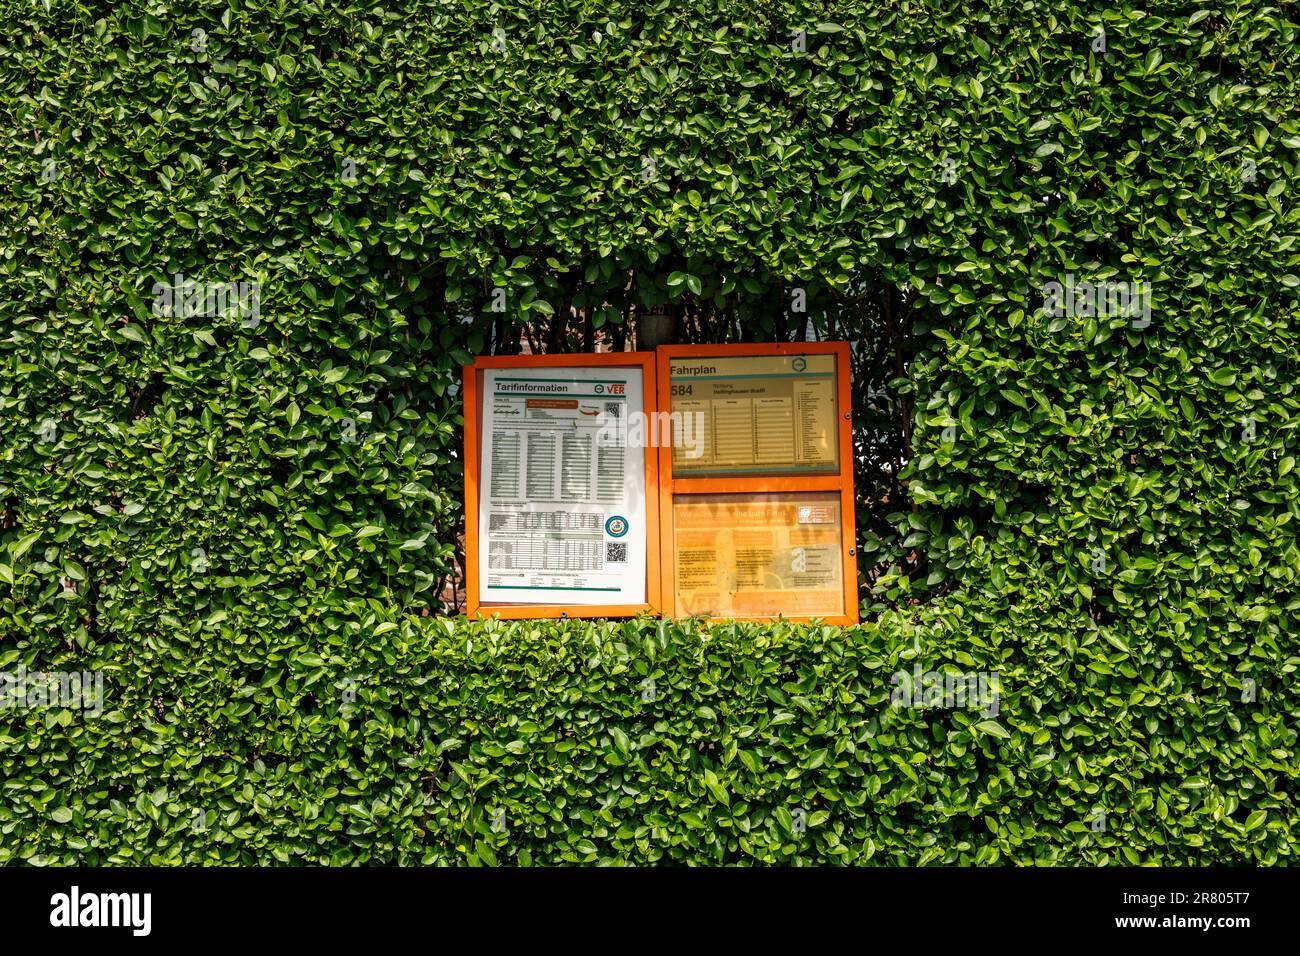 hedge with bus timetable cut free at a bus stop in Gevelsberg-Silschede, North Rhine-Westphalia, Germany. Hecke mit freigeschnittenem Busfahrtplan an Stock Photo